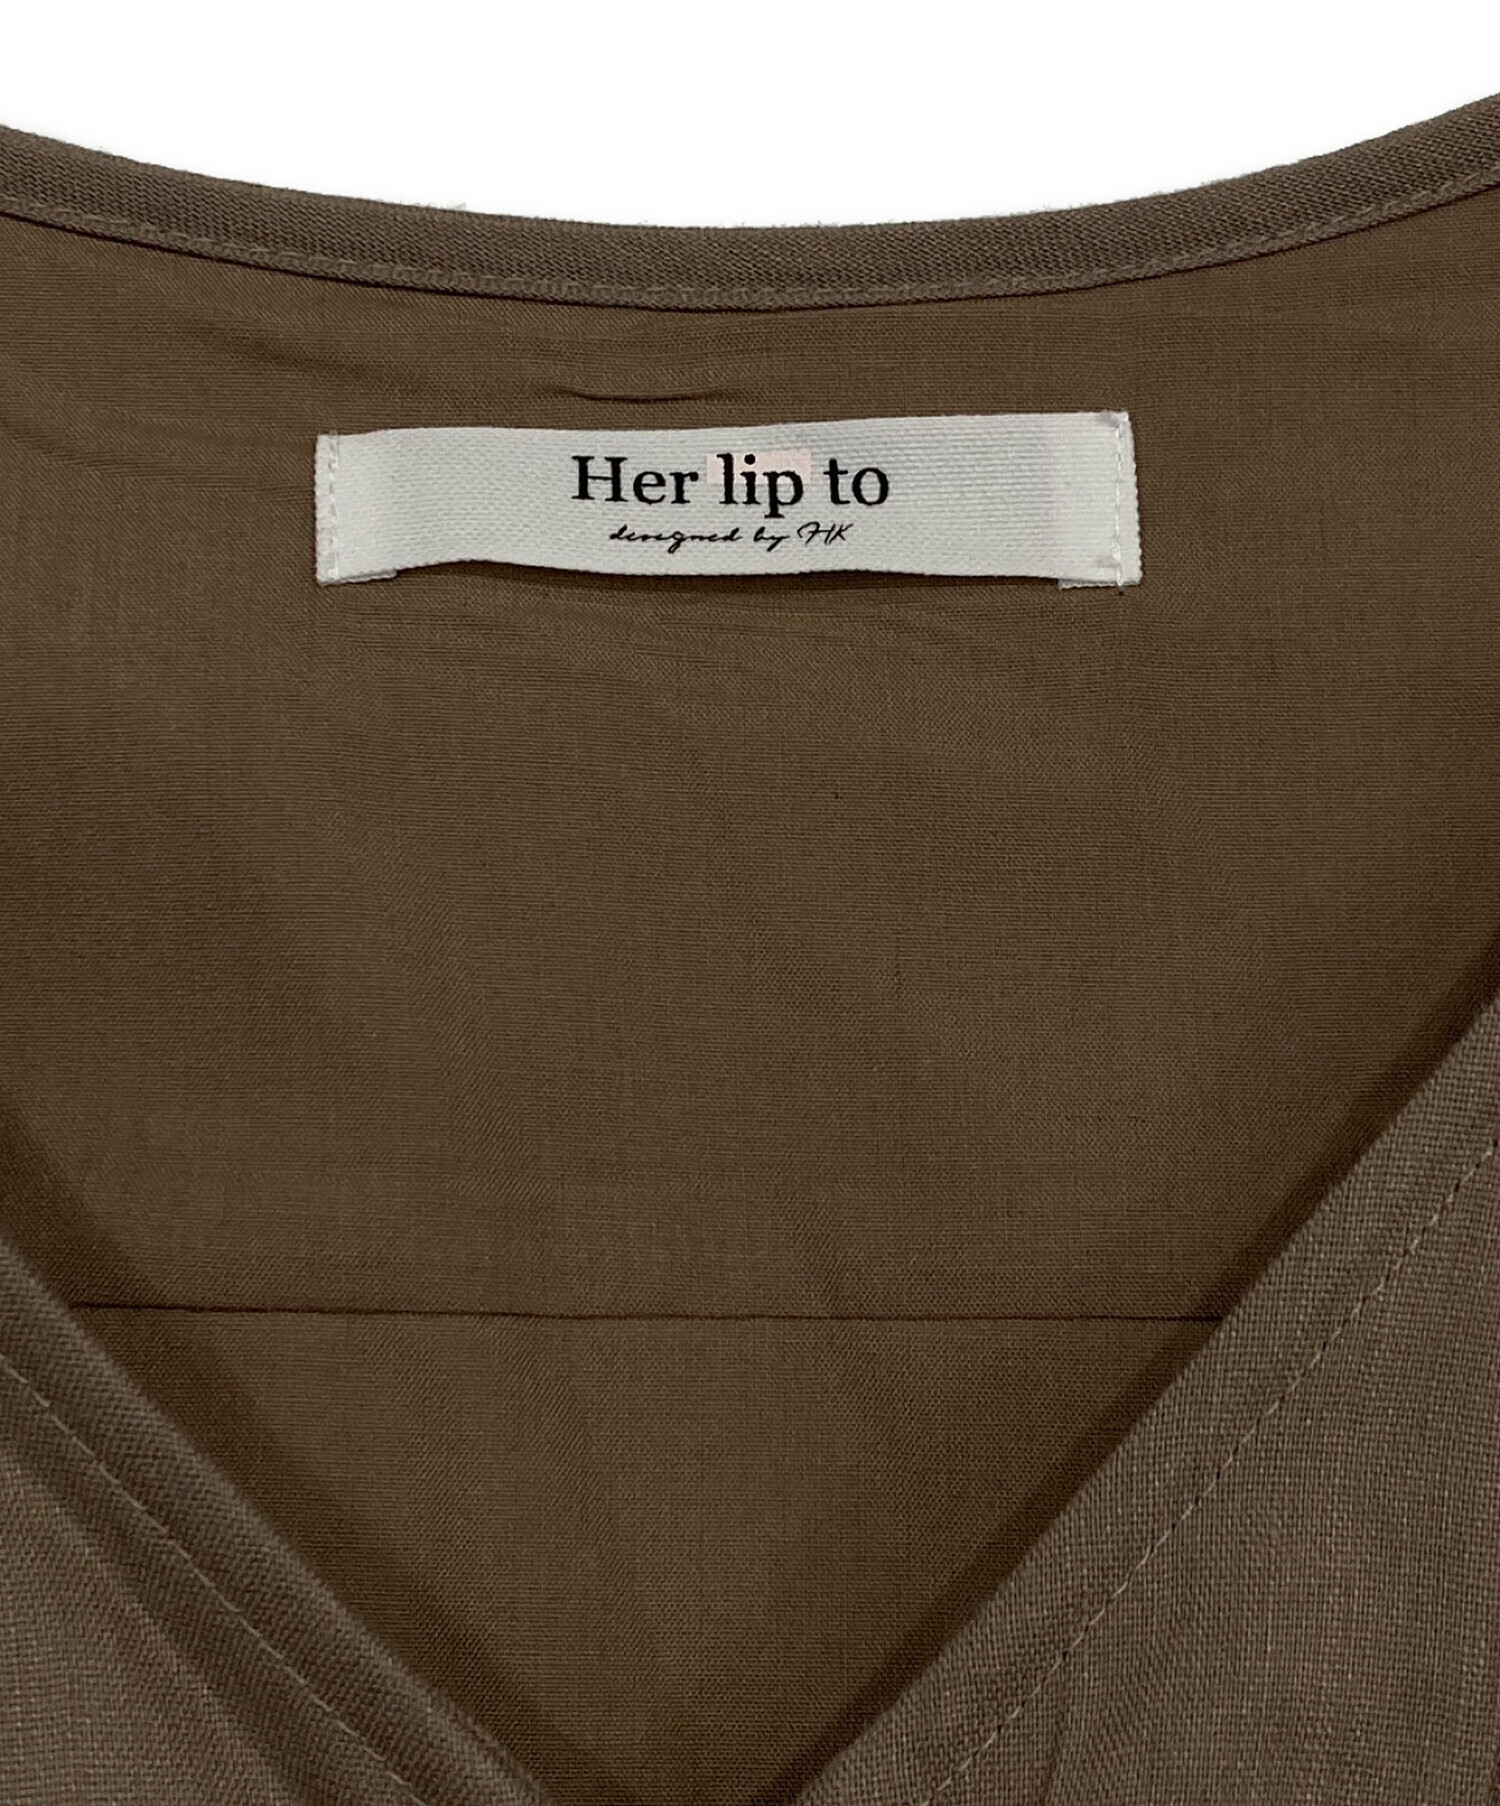 Her lip to 初期Tシャツ